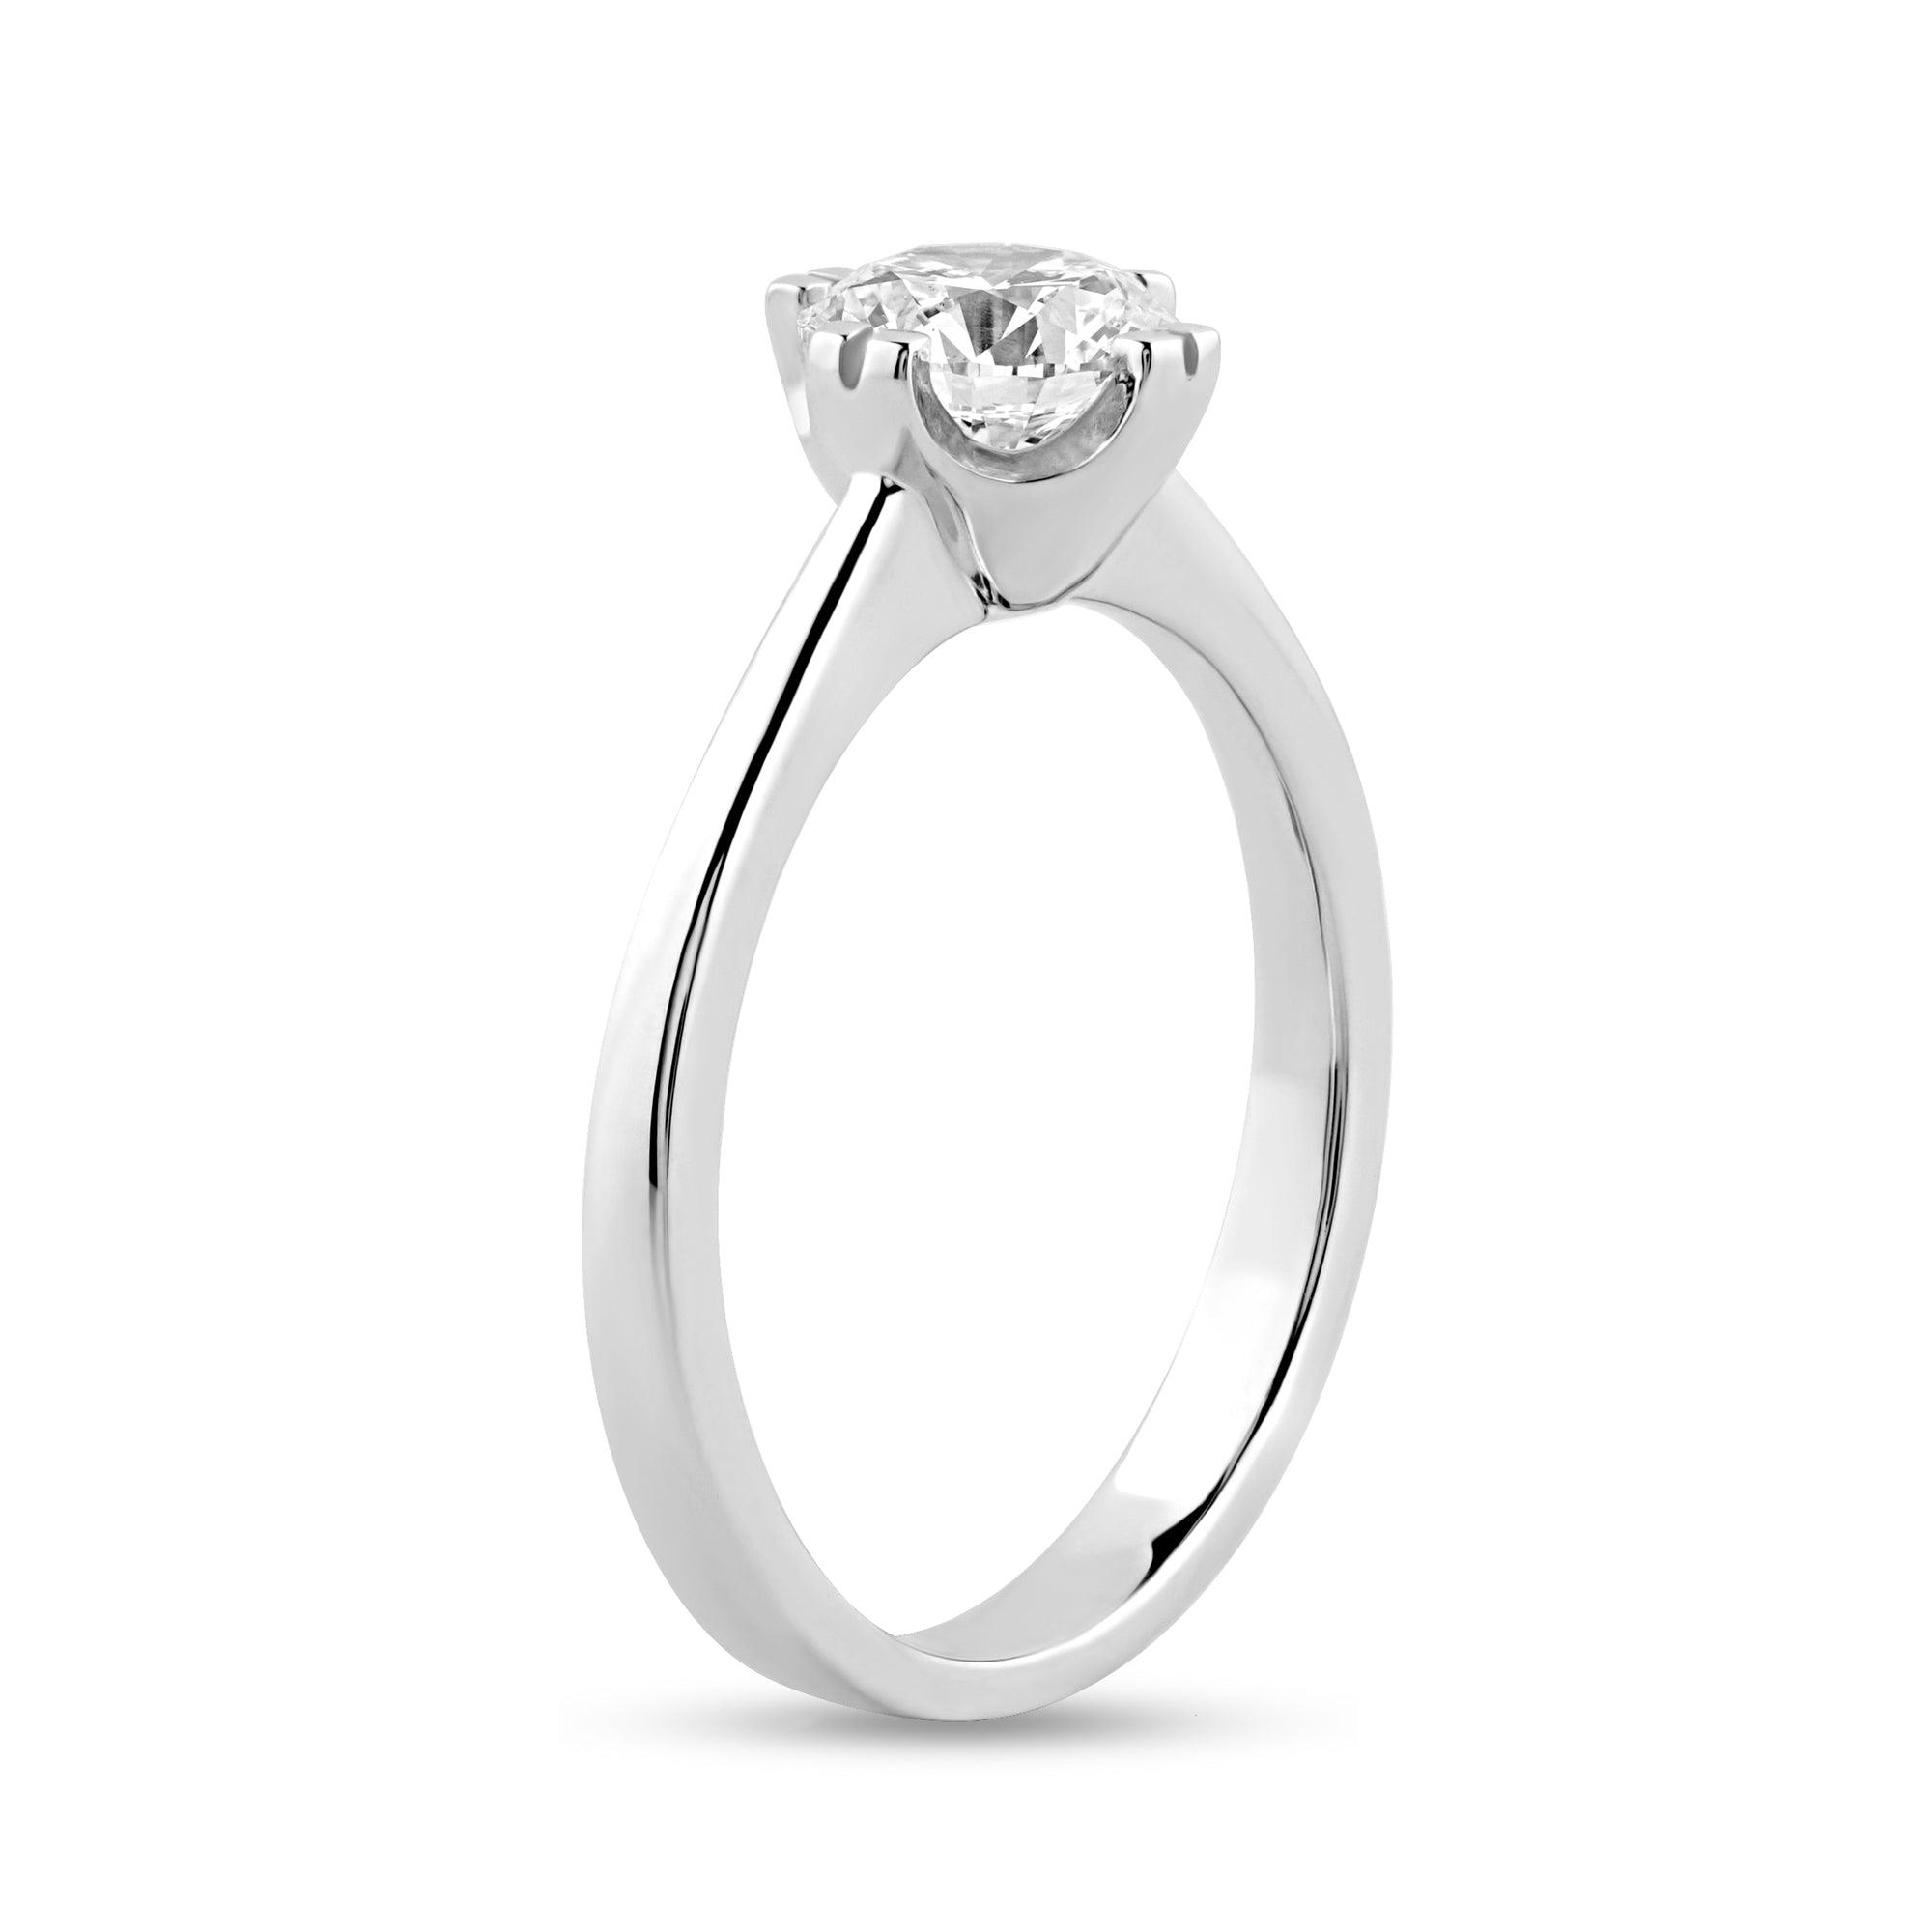 Moissanite Solitaire with .92ct Round Center Stone - Harmony Bound